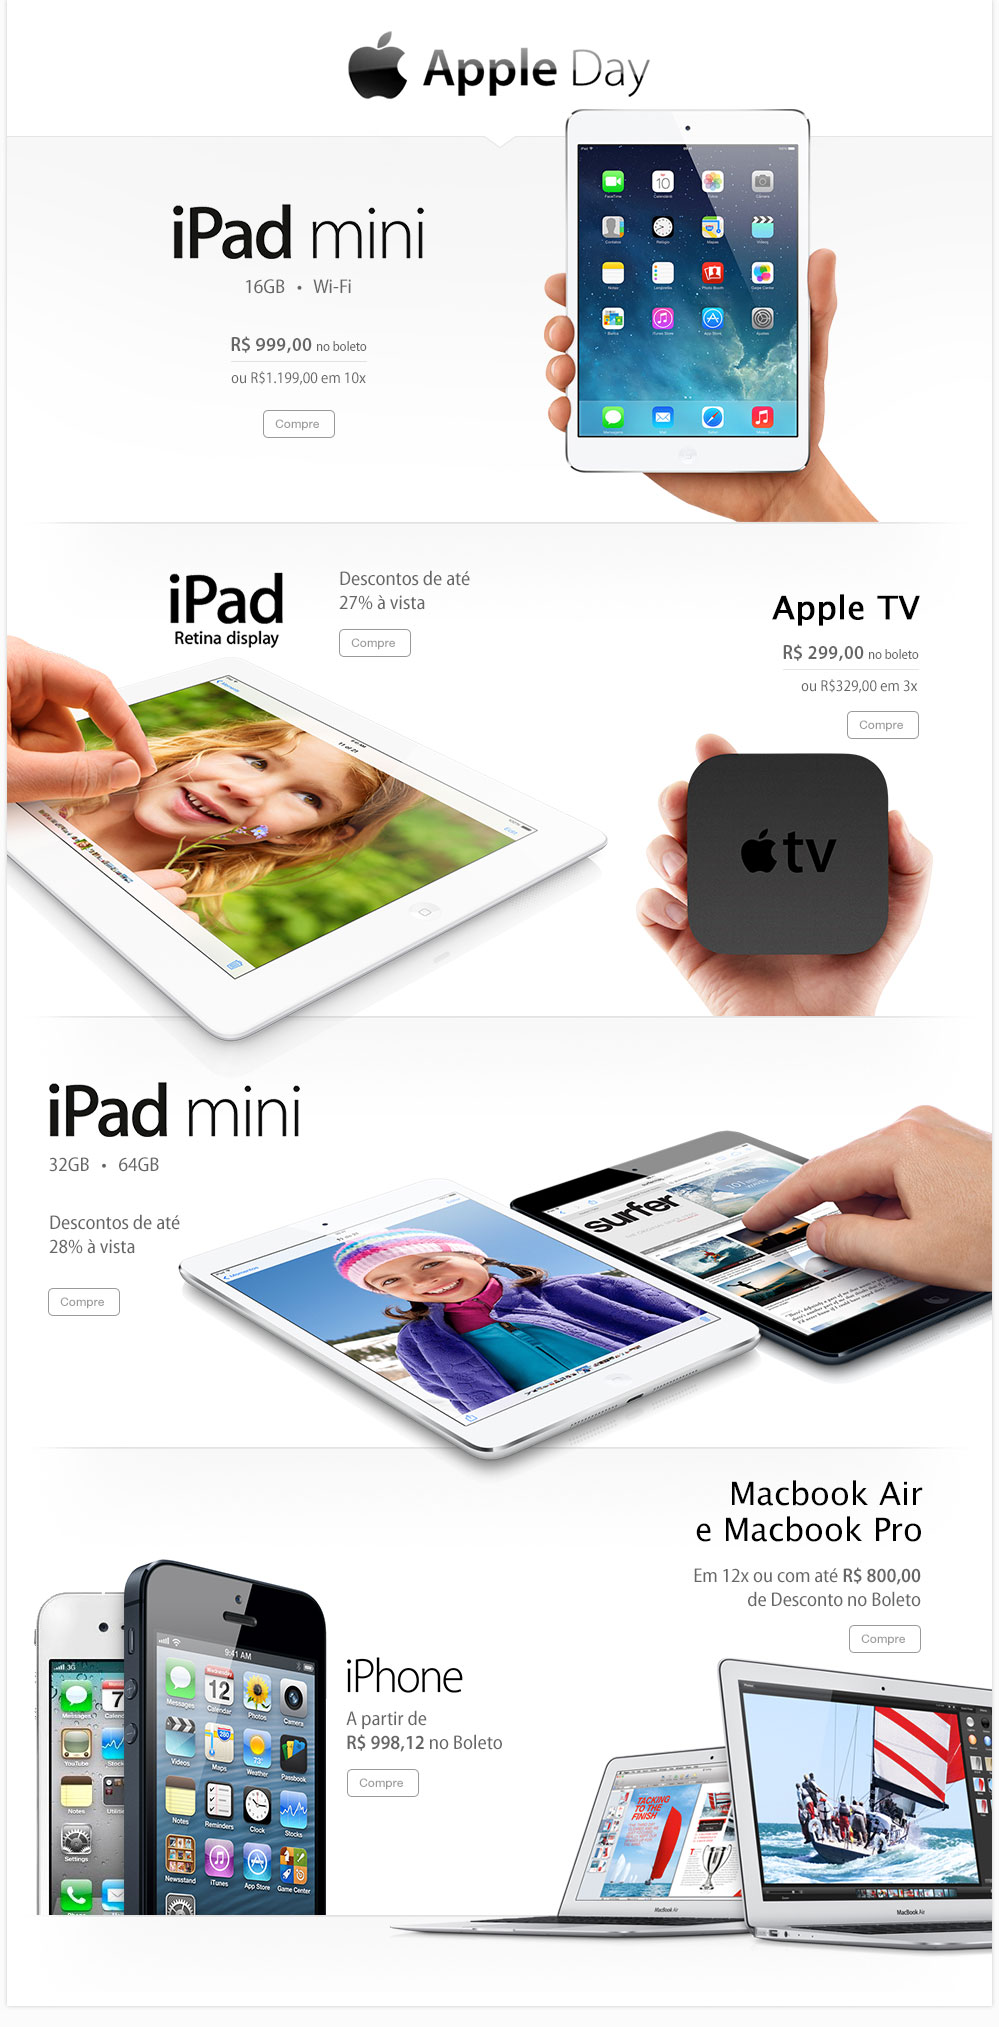 ↪ “Apple Day”: iPads and Apple TV on sale at Fast Shop!